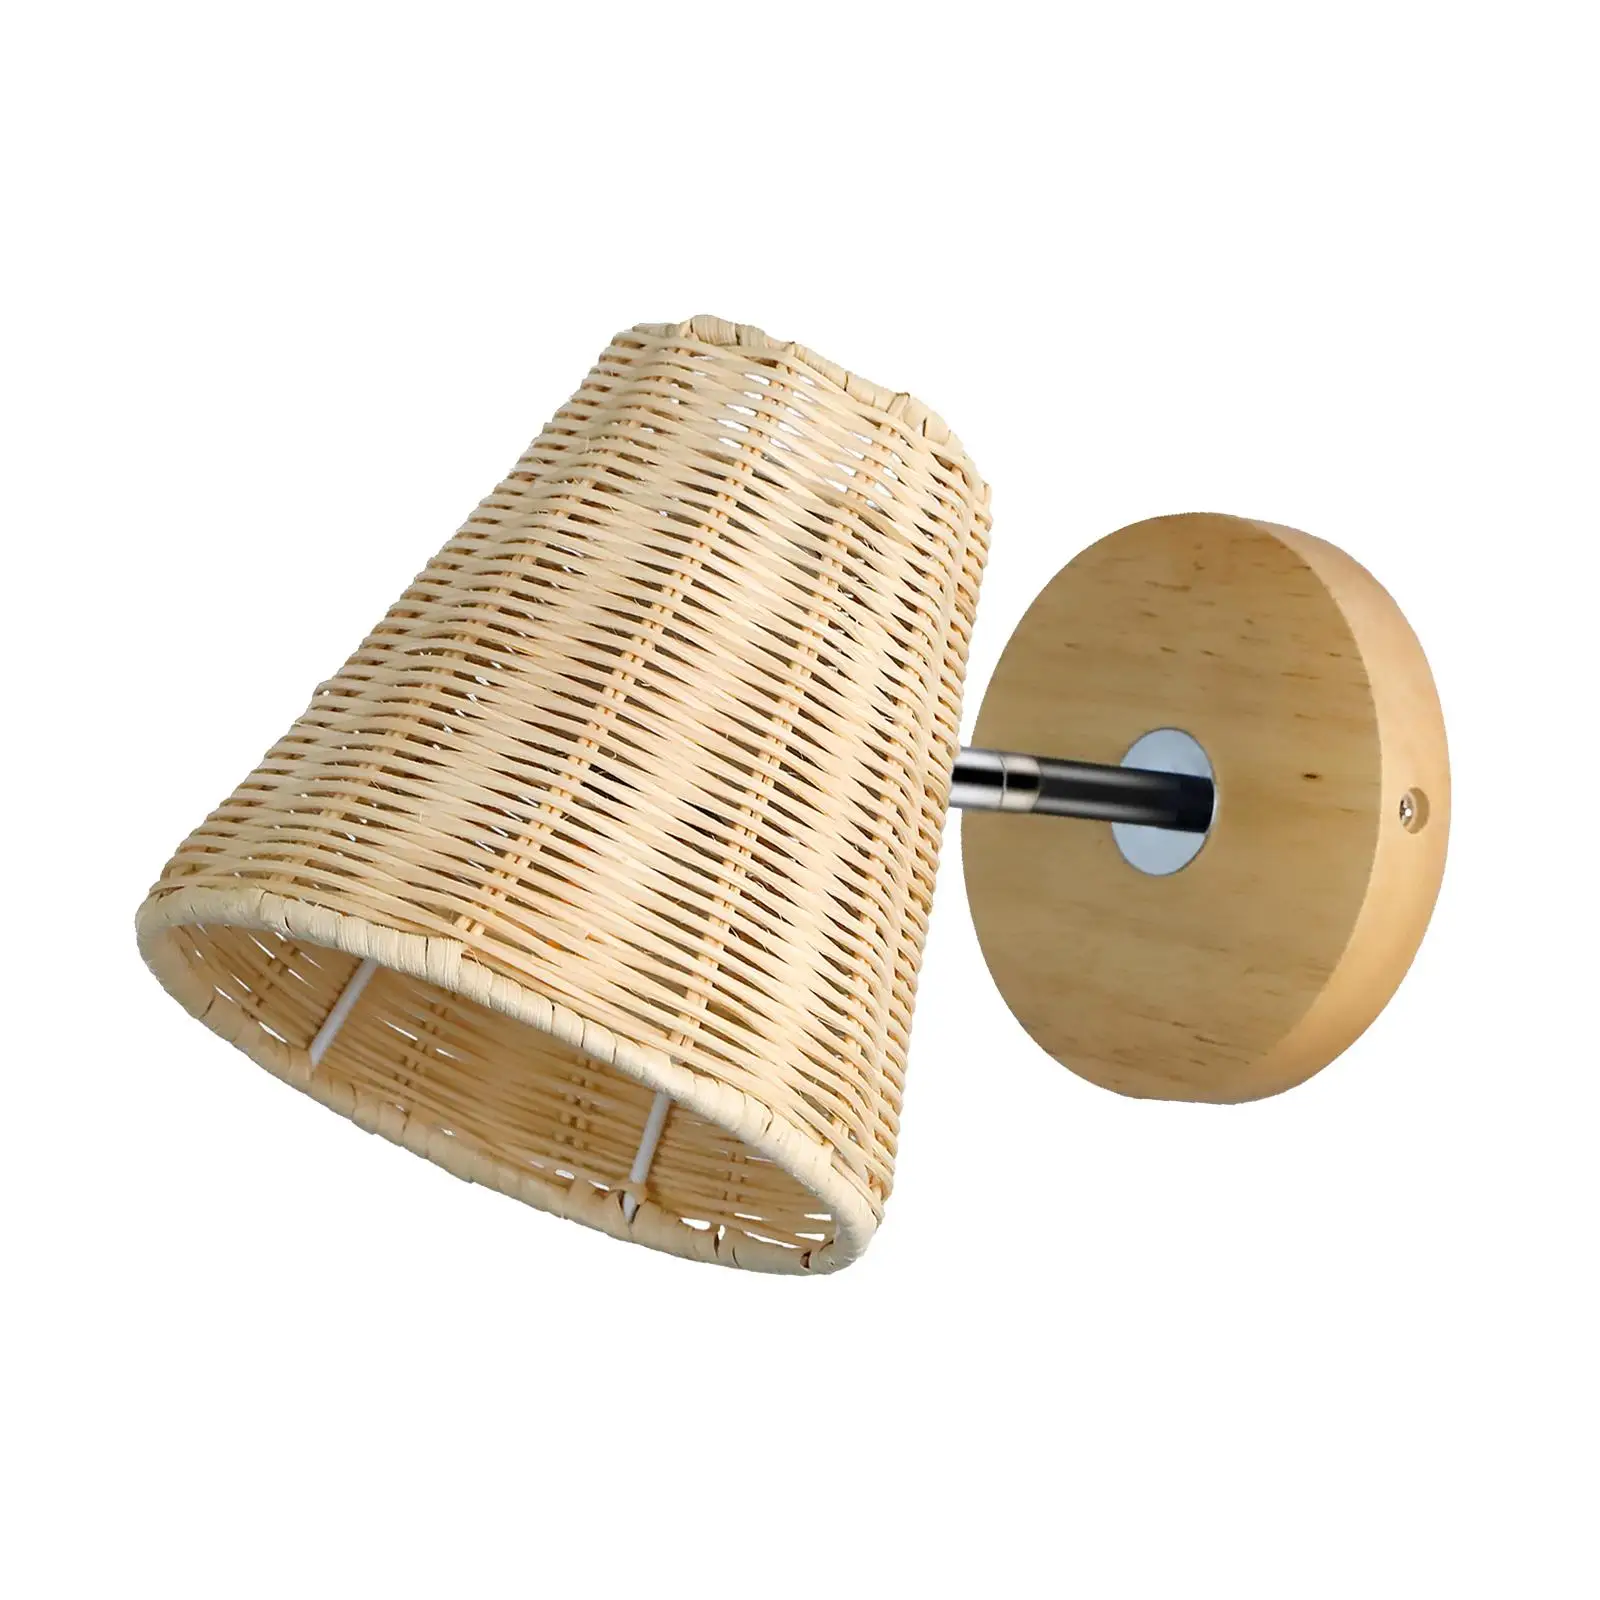 Rattan Wall Sconce Handmade Lighting Rustic Wall Sconces for Cafe Hotel Barn